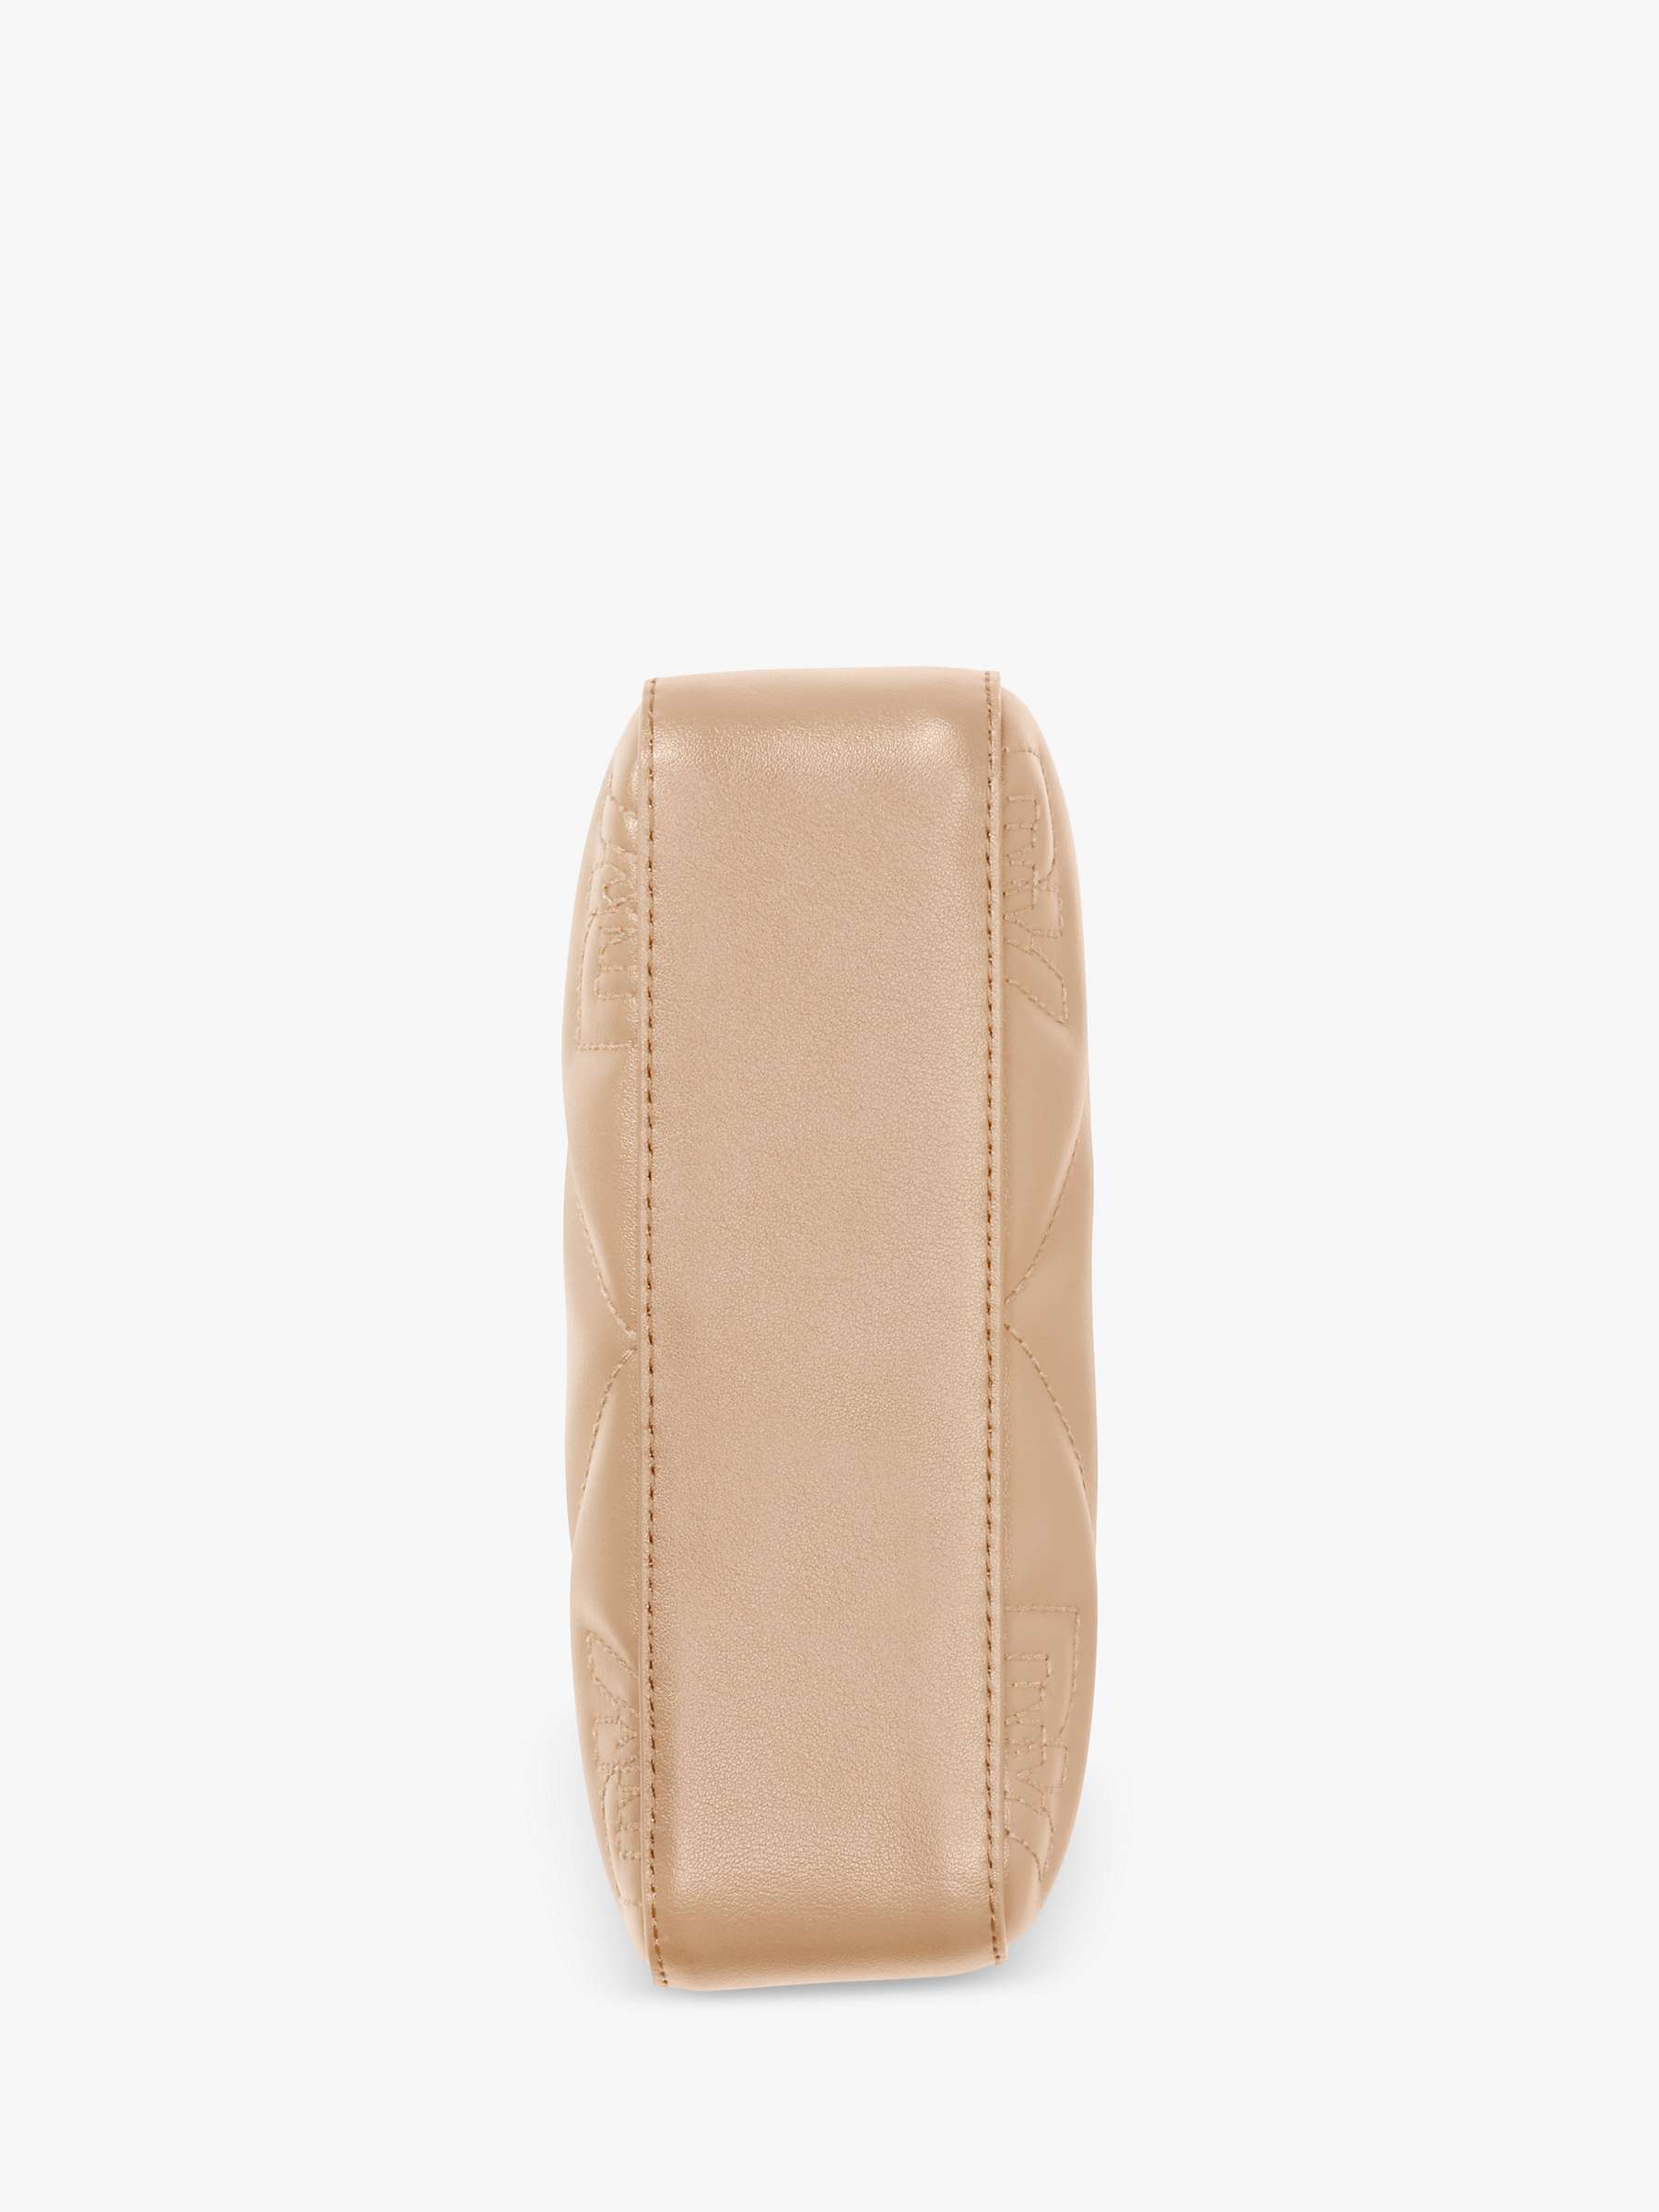 DKNY Crosstown Leather Quilted Camera Bag, Neutral at John Lewis & Partners